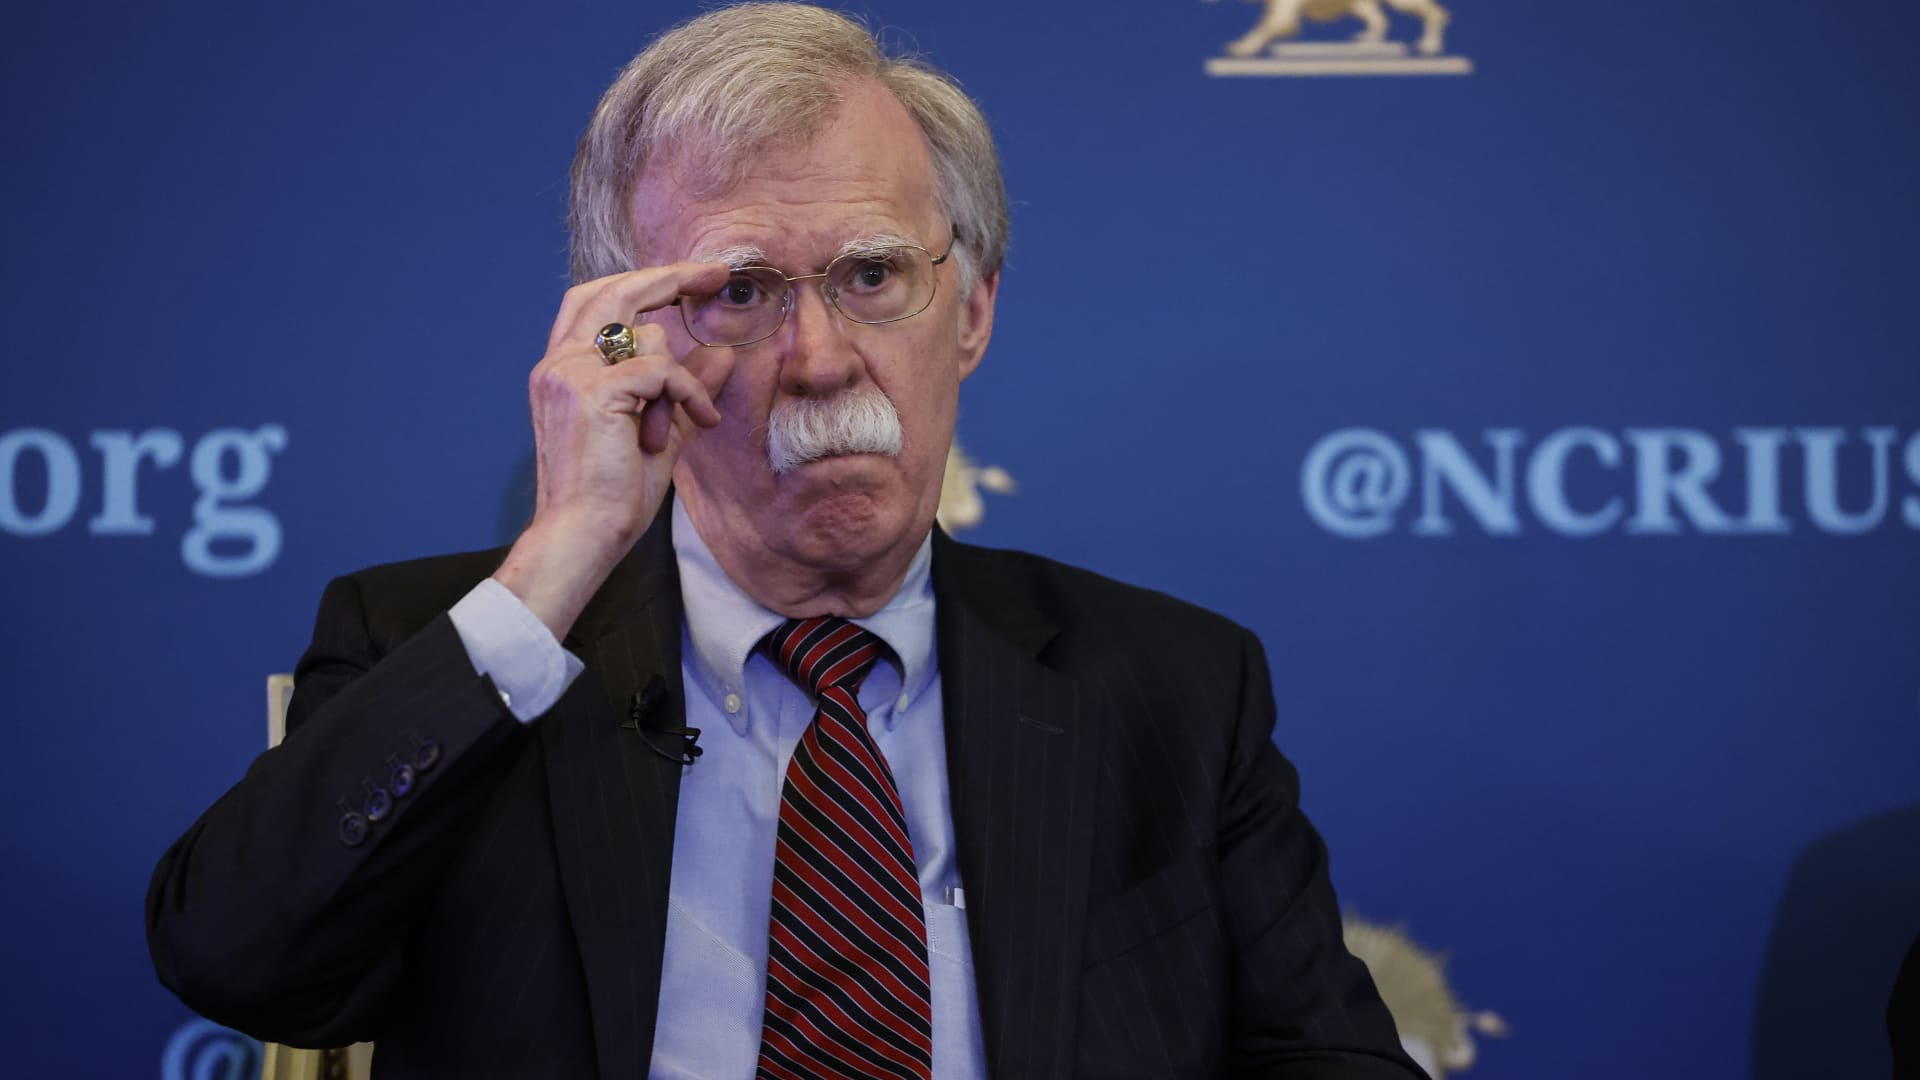 John Bolton says Biden administration is making a ‘stunning mistake’ in pursuing Iran nuclear deal